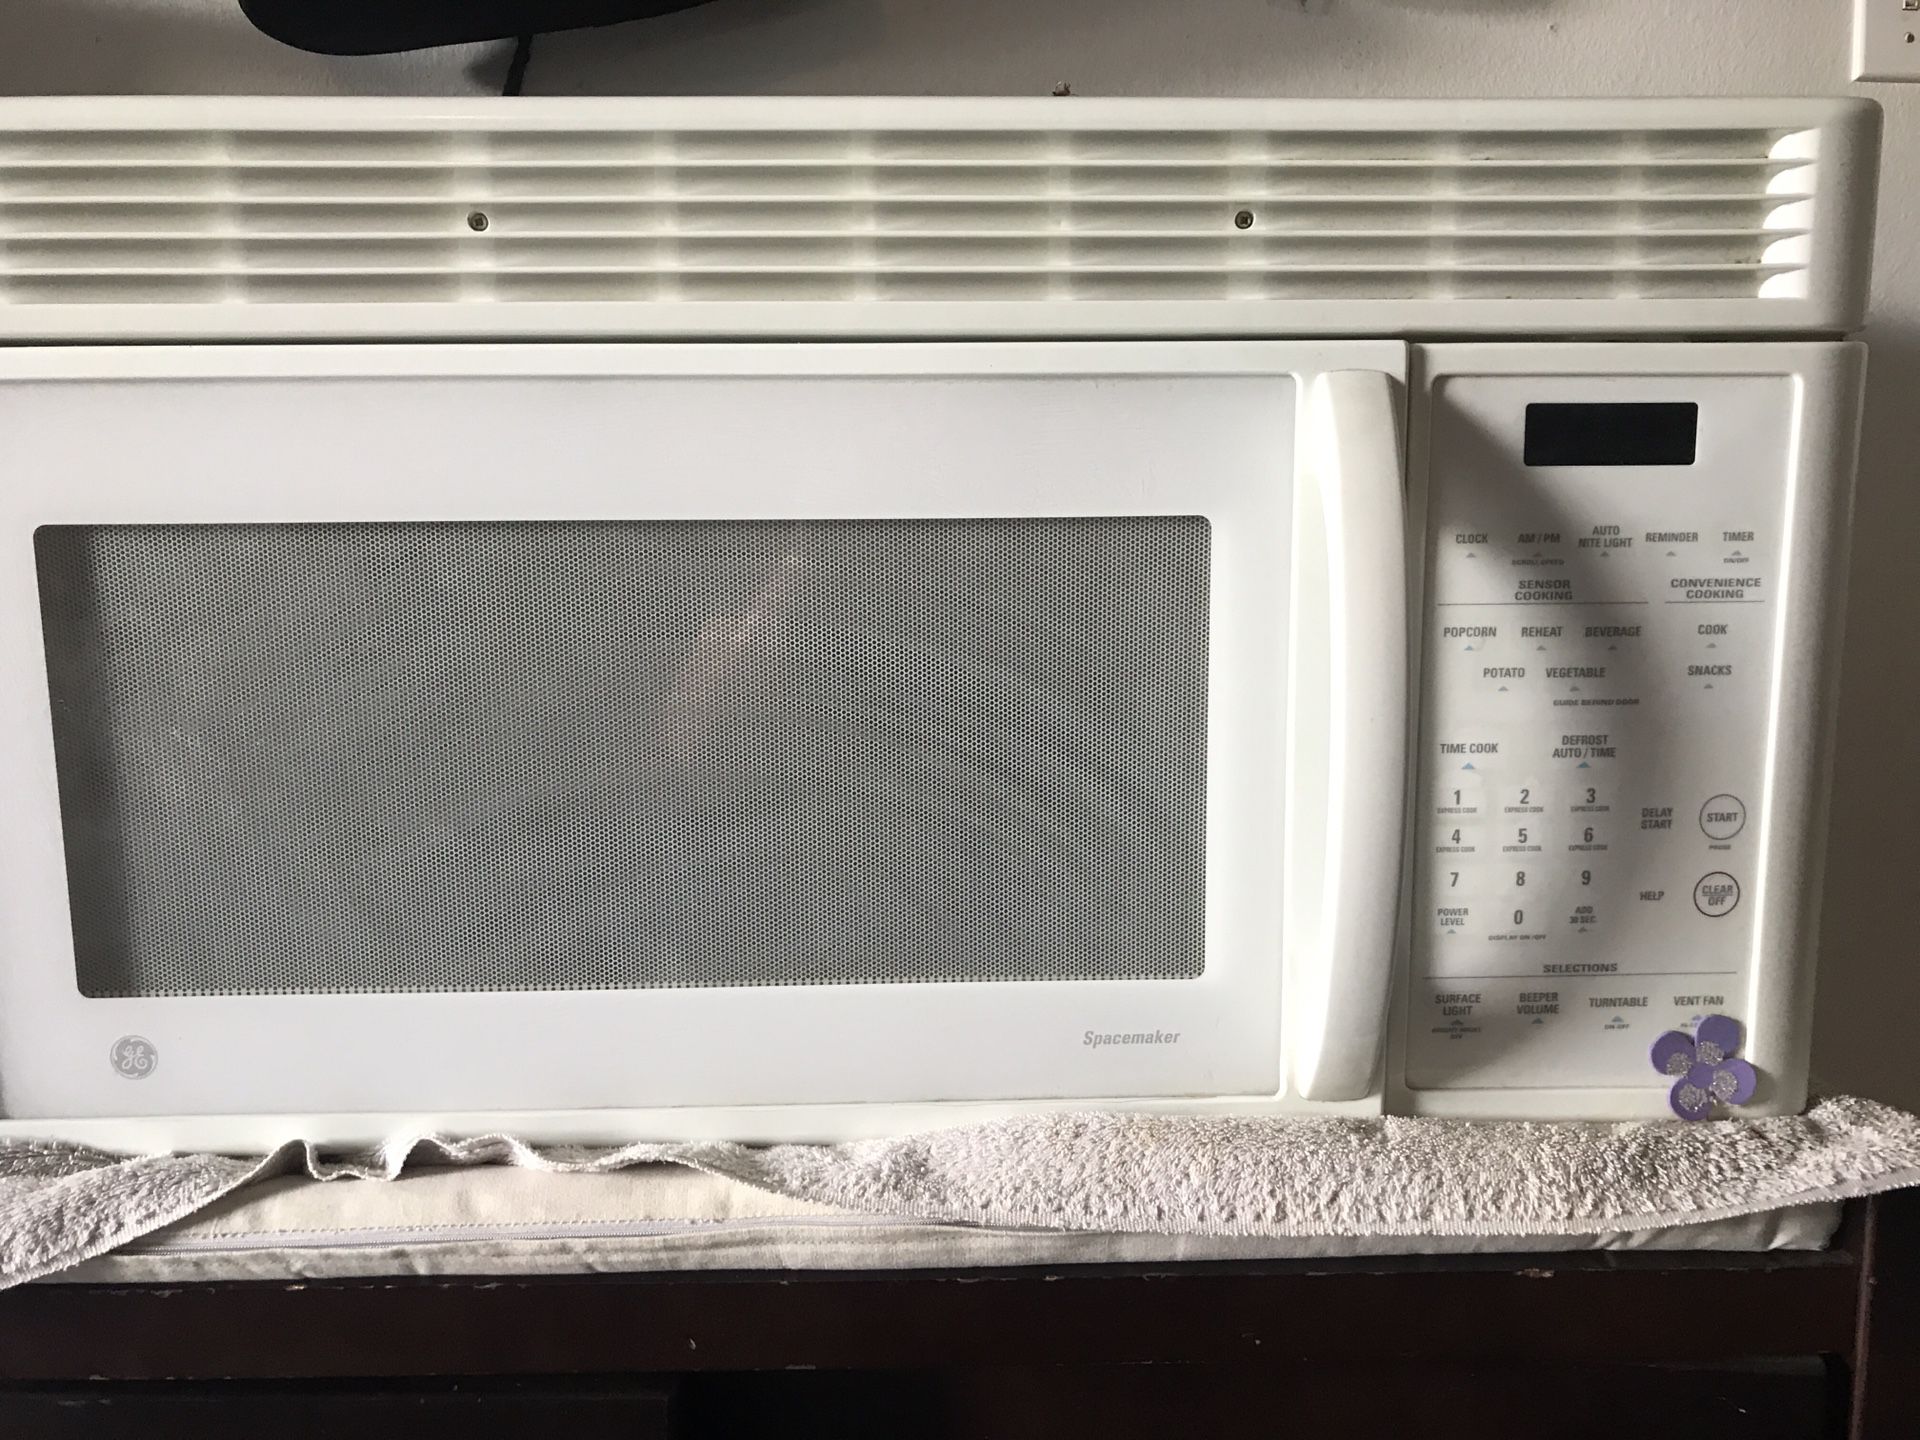 GE microwave spacemaker under the counter